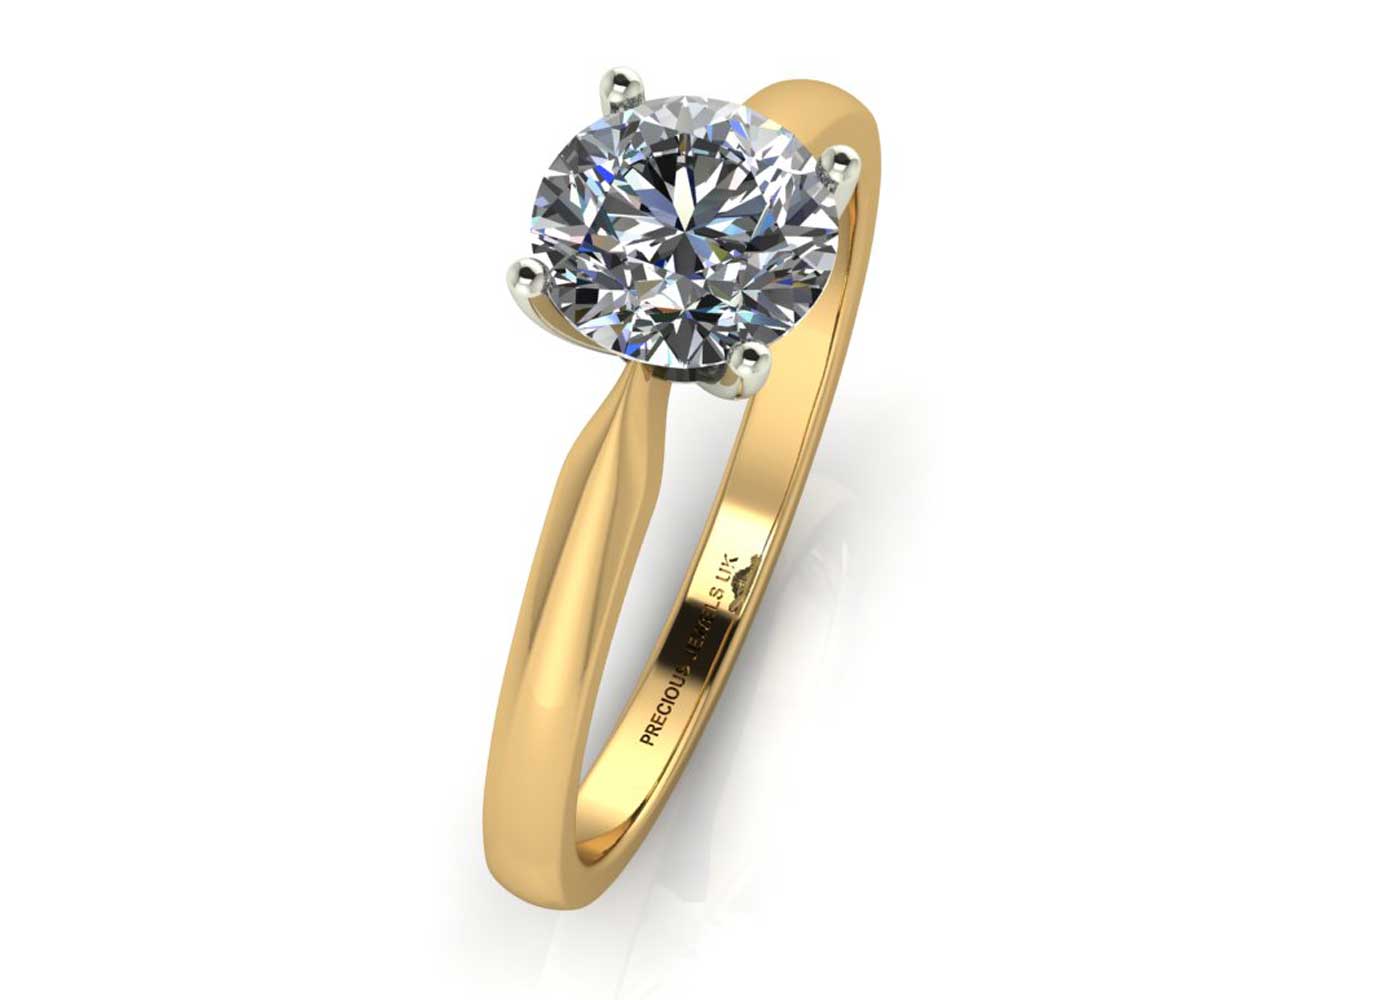 18ct Yellow Gold Claw Set Diamond Ring 0.25 Carats - Image 3 of 4